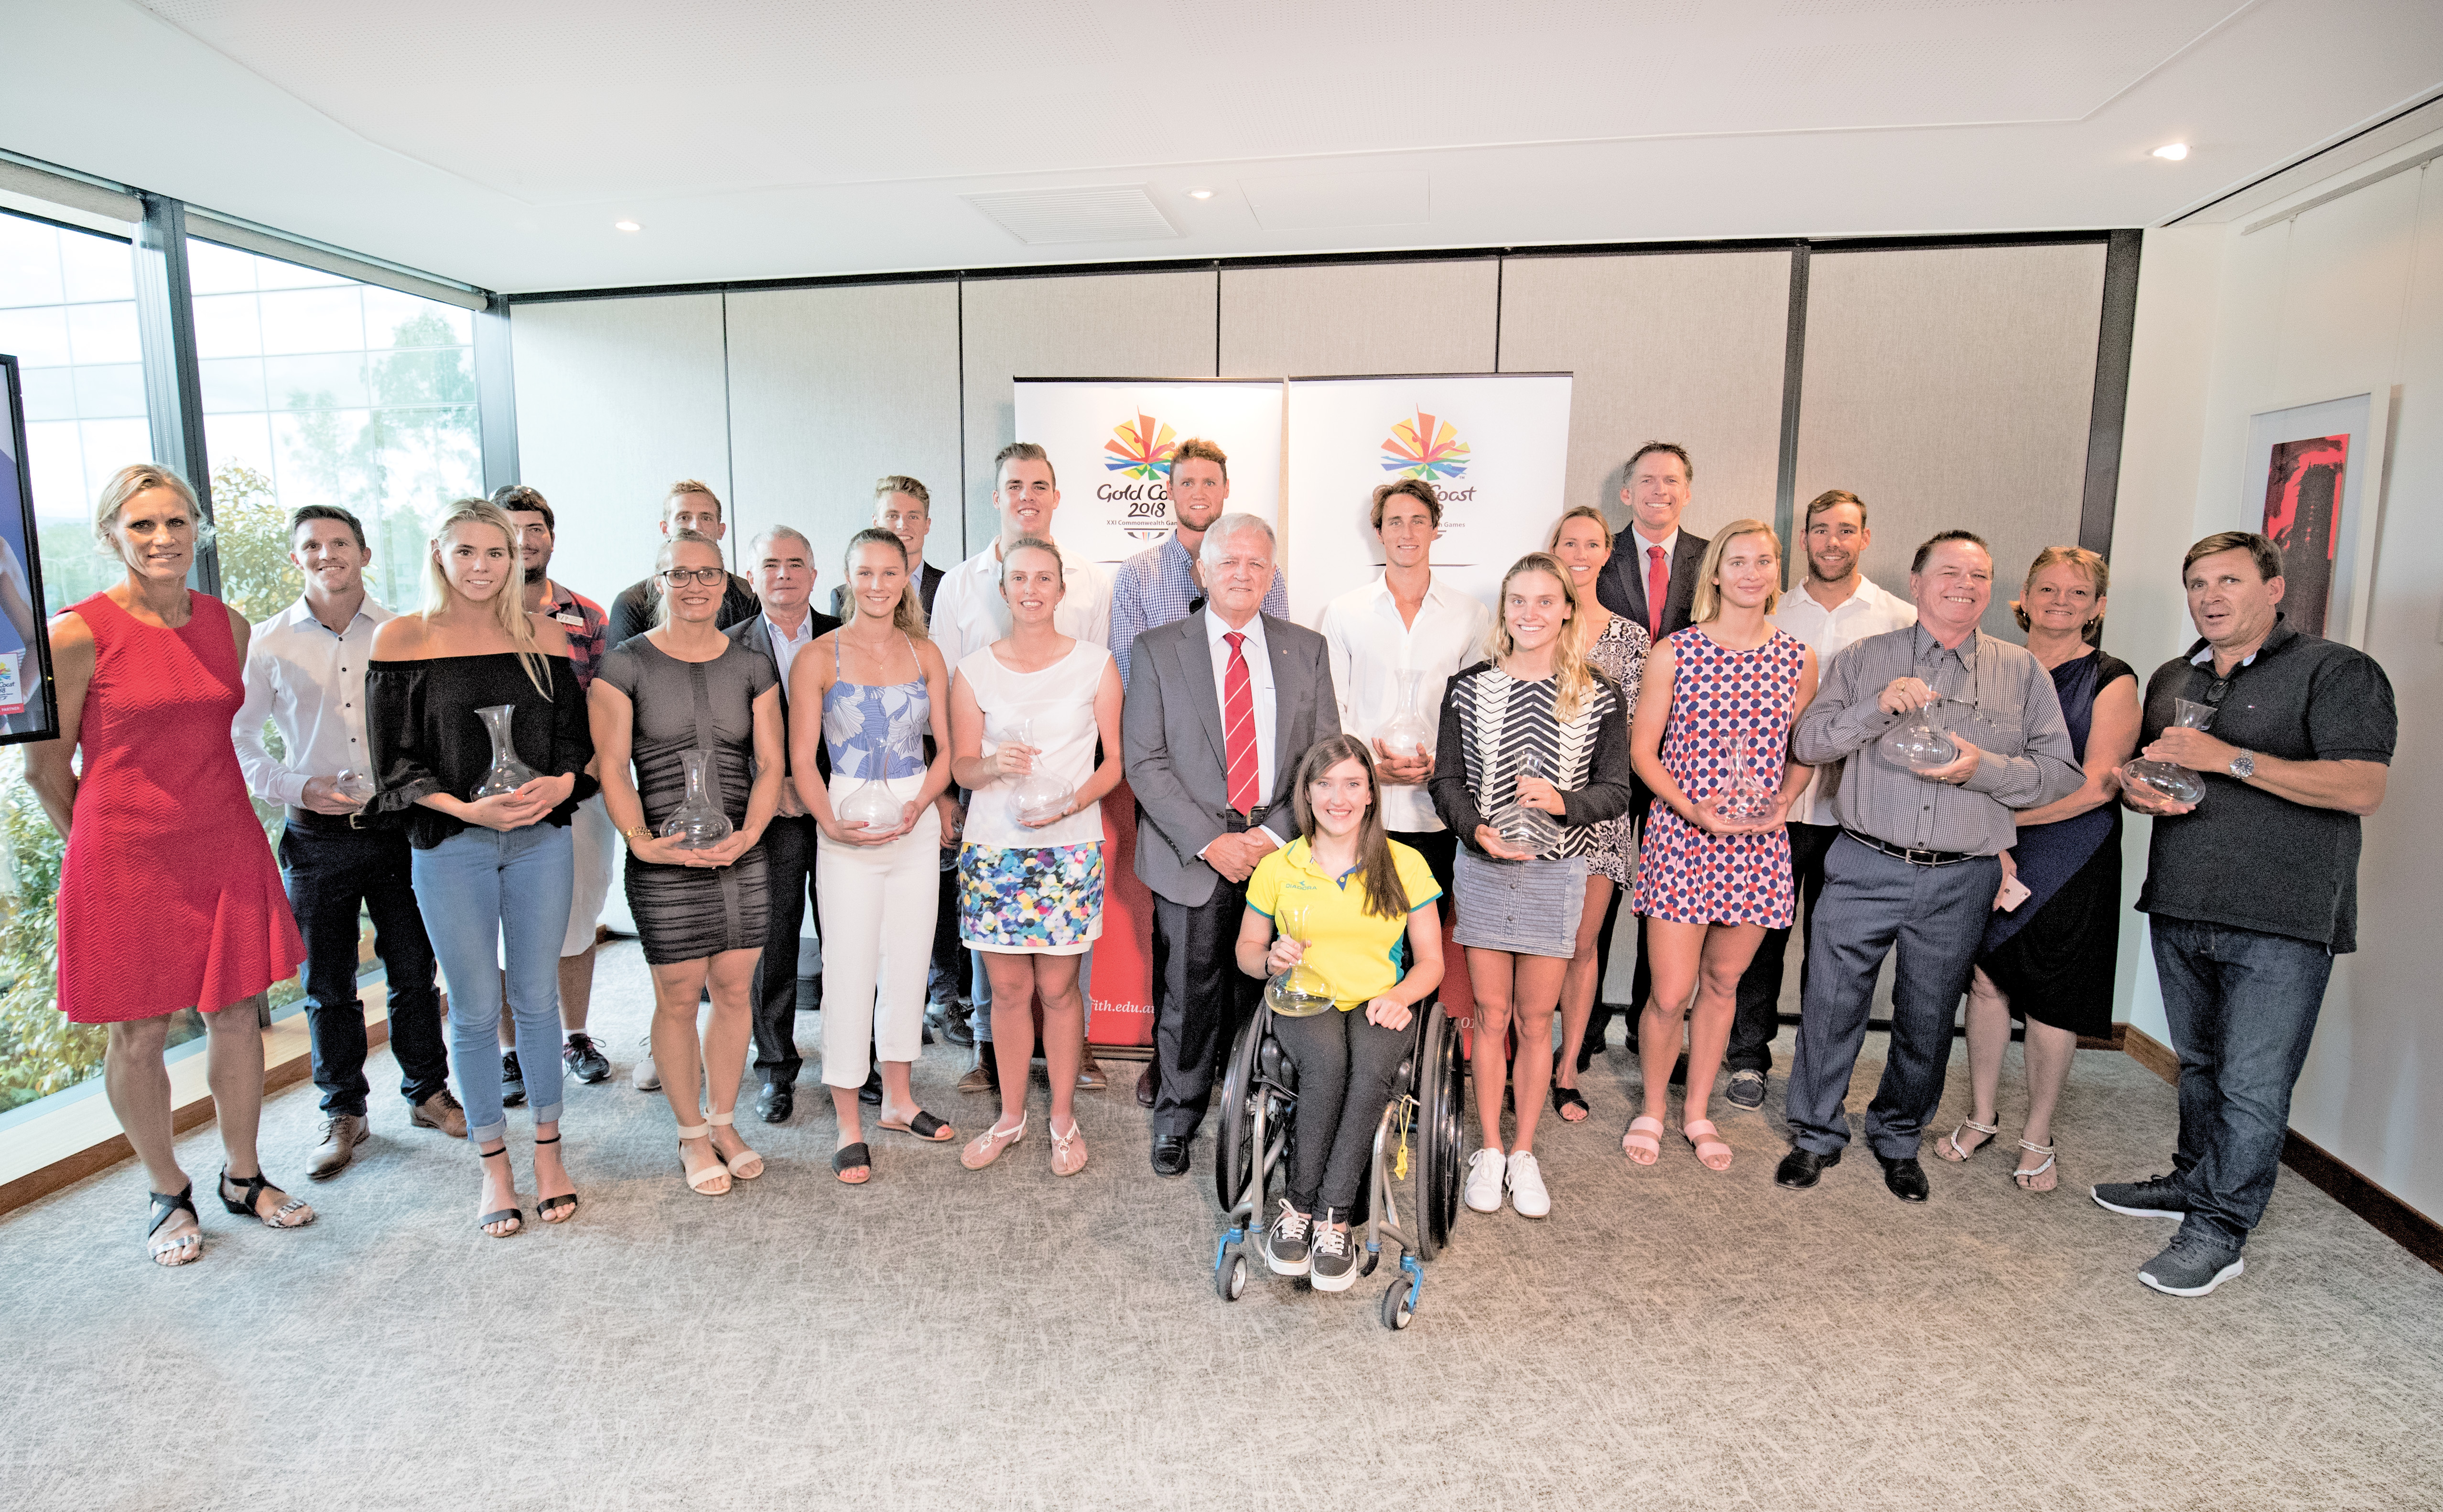 Vice Chancellor and President, Professor Ian O'Connor AC, has bid farewell to Team Griffith ahead of the Gold Coast 2018 Commonwealth Games.